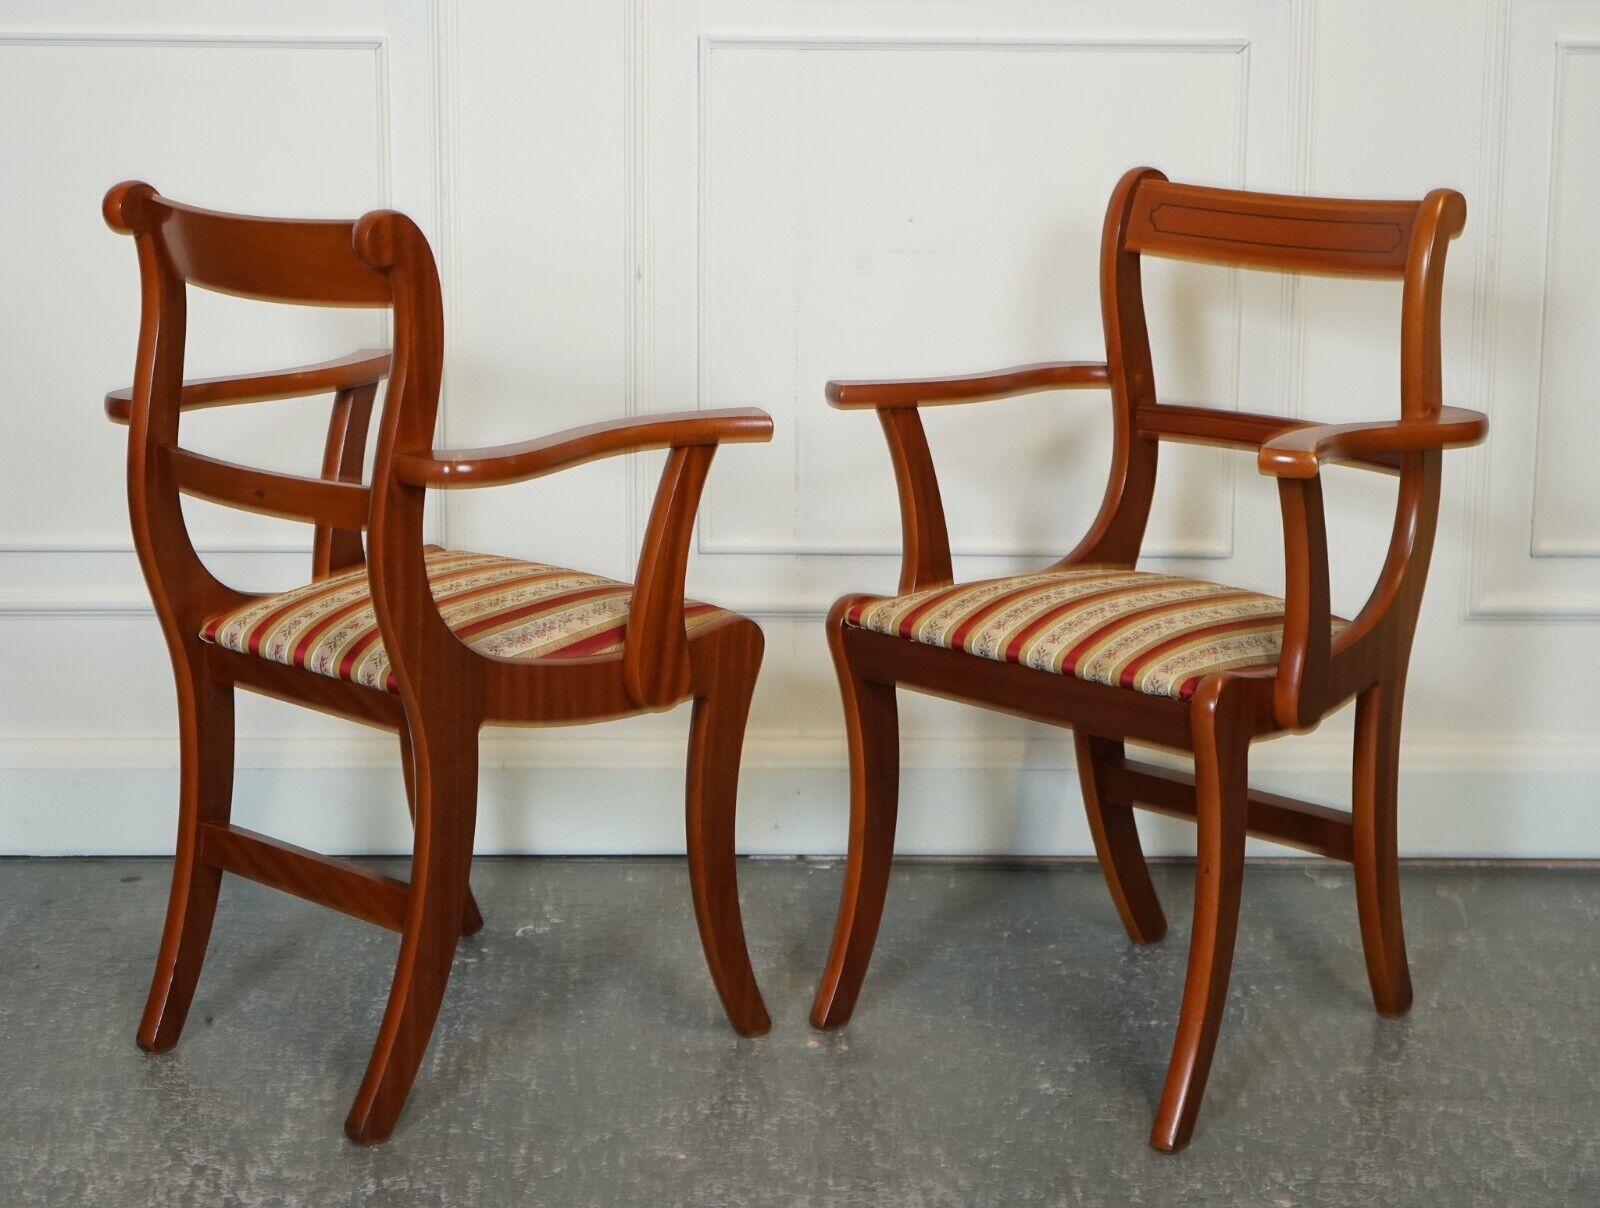 VINTAGE SET OF 8 YEW WOOD DINING CHAIRS J1